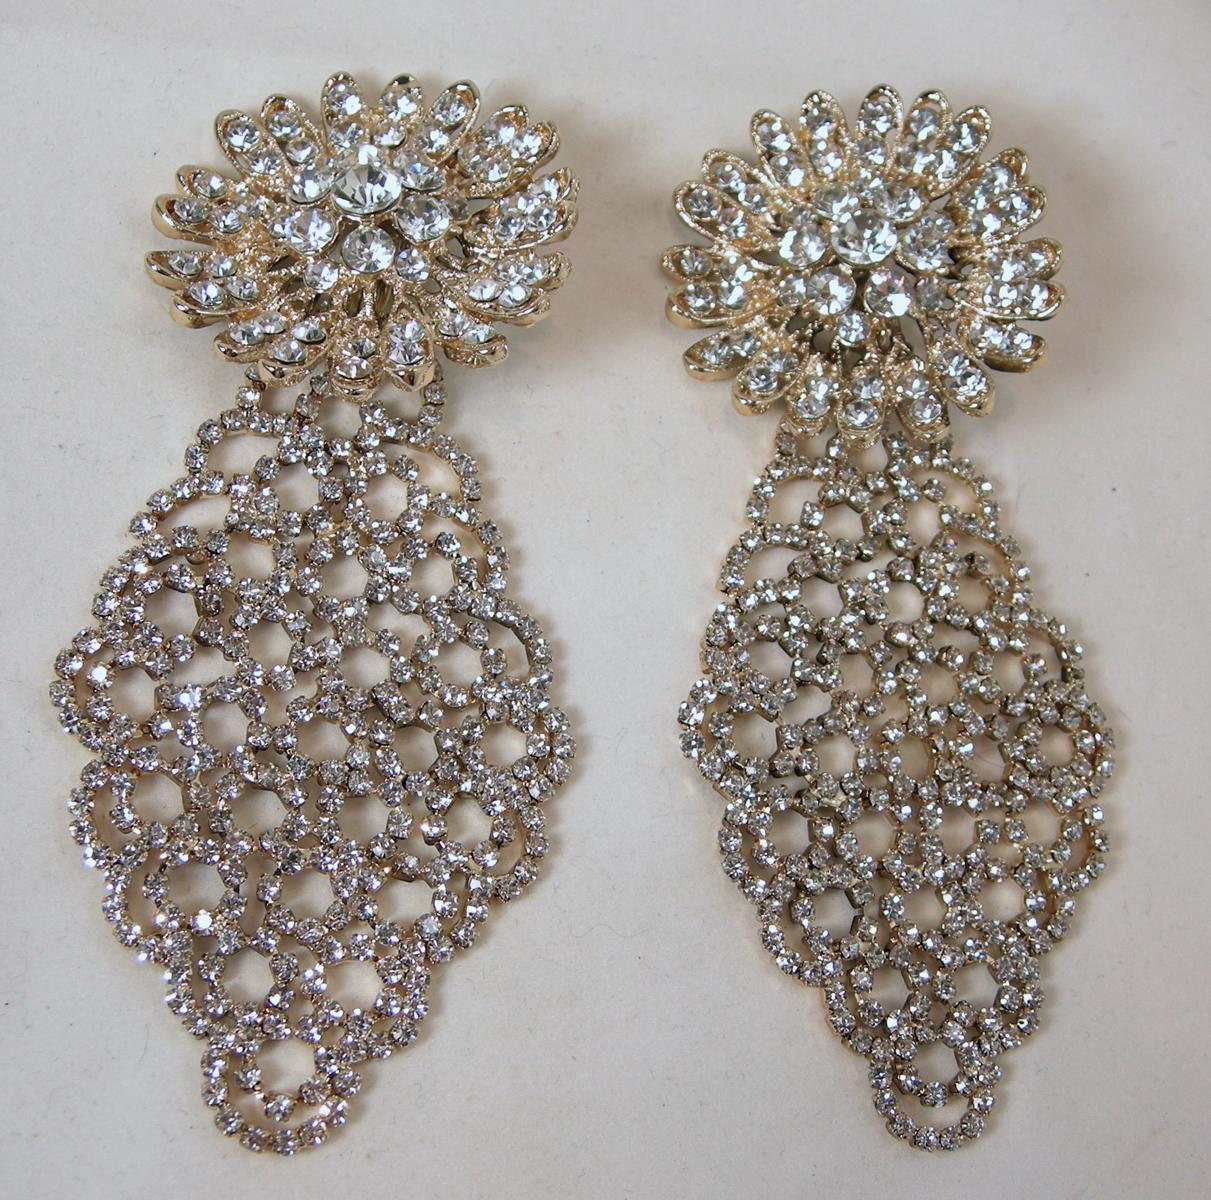 These long runway earrings are signed DeMario.  The top has a large 3-dimensional floral design with a long dangling drop.  The drop has brilliant, clear crystals in a gold tone setting.  In excellent condition, these clip earrings measure 4-3/4” x